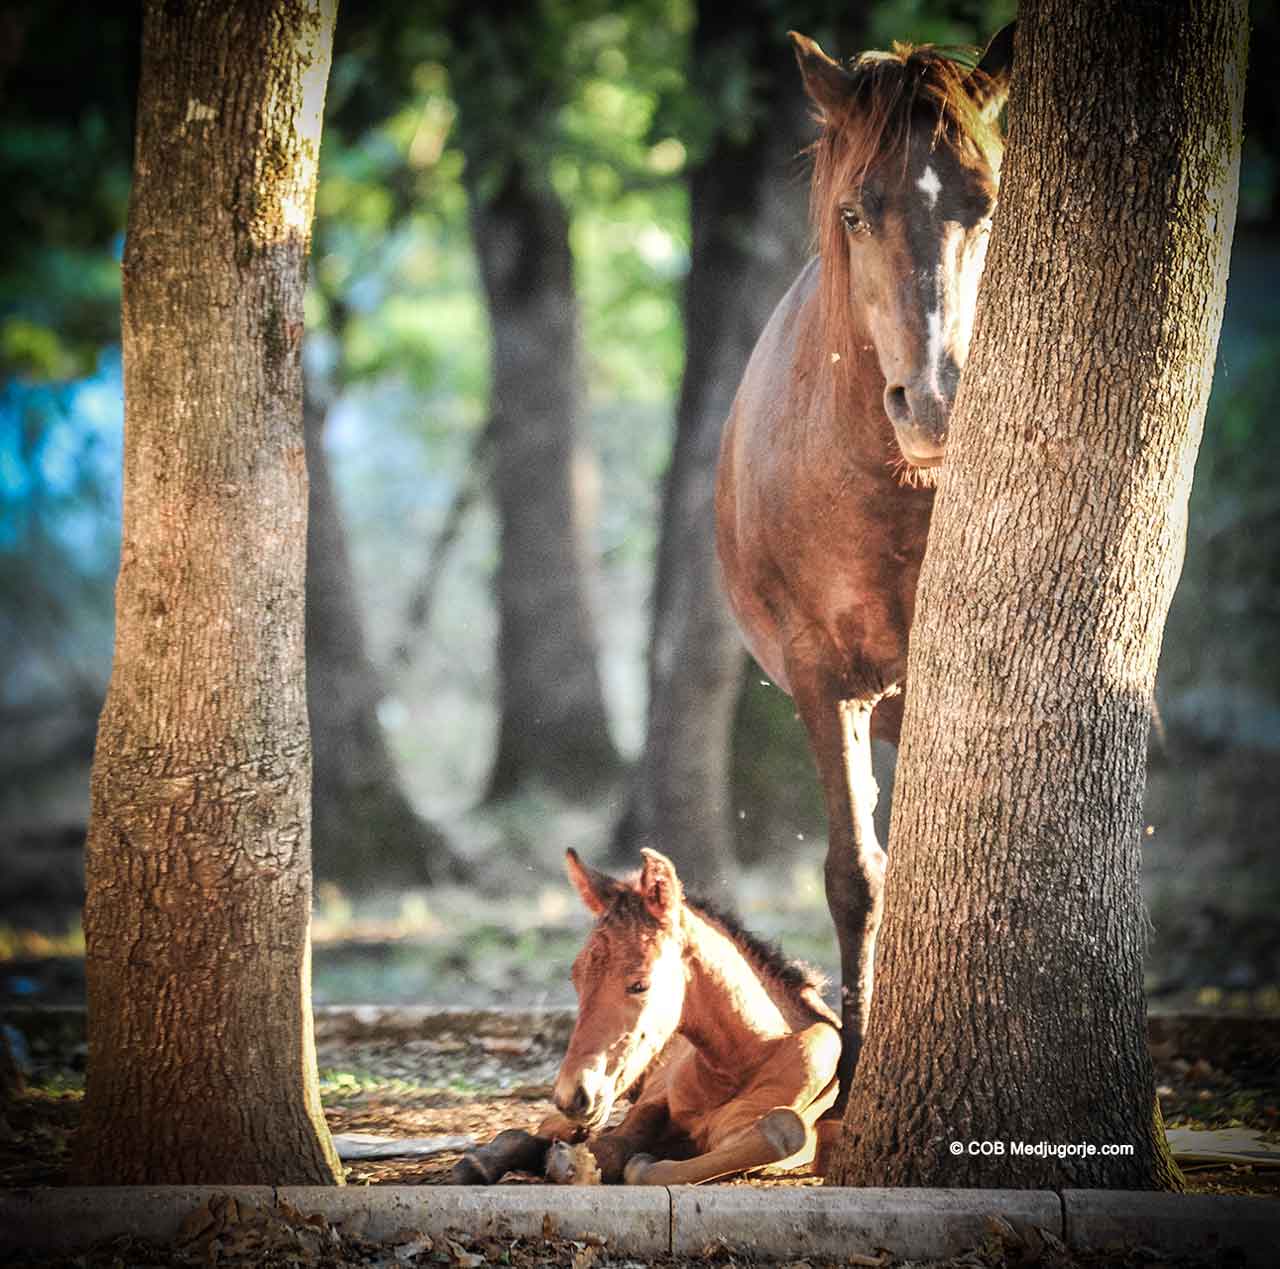 Mother horse with baby horse in Medjugorje